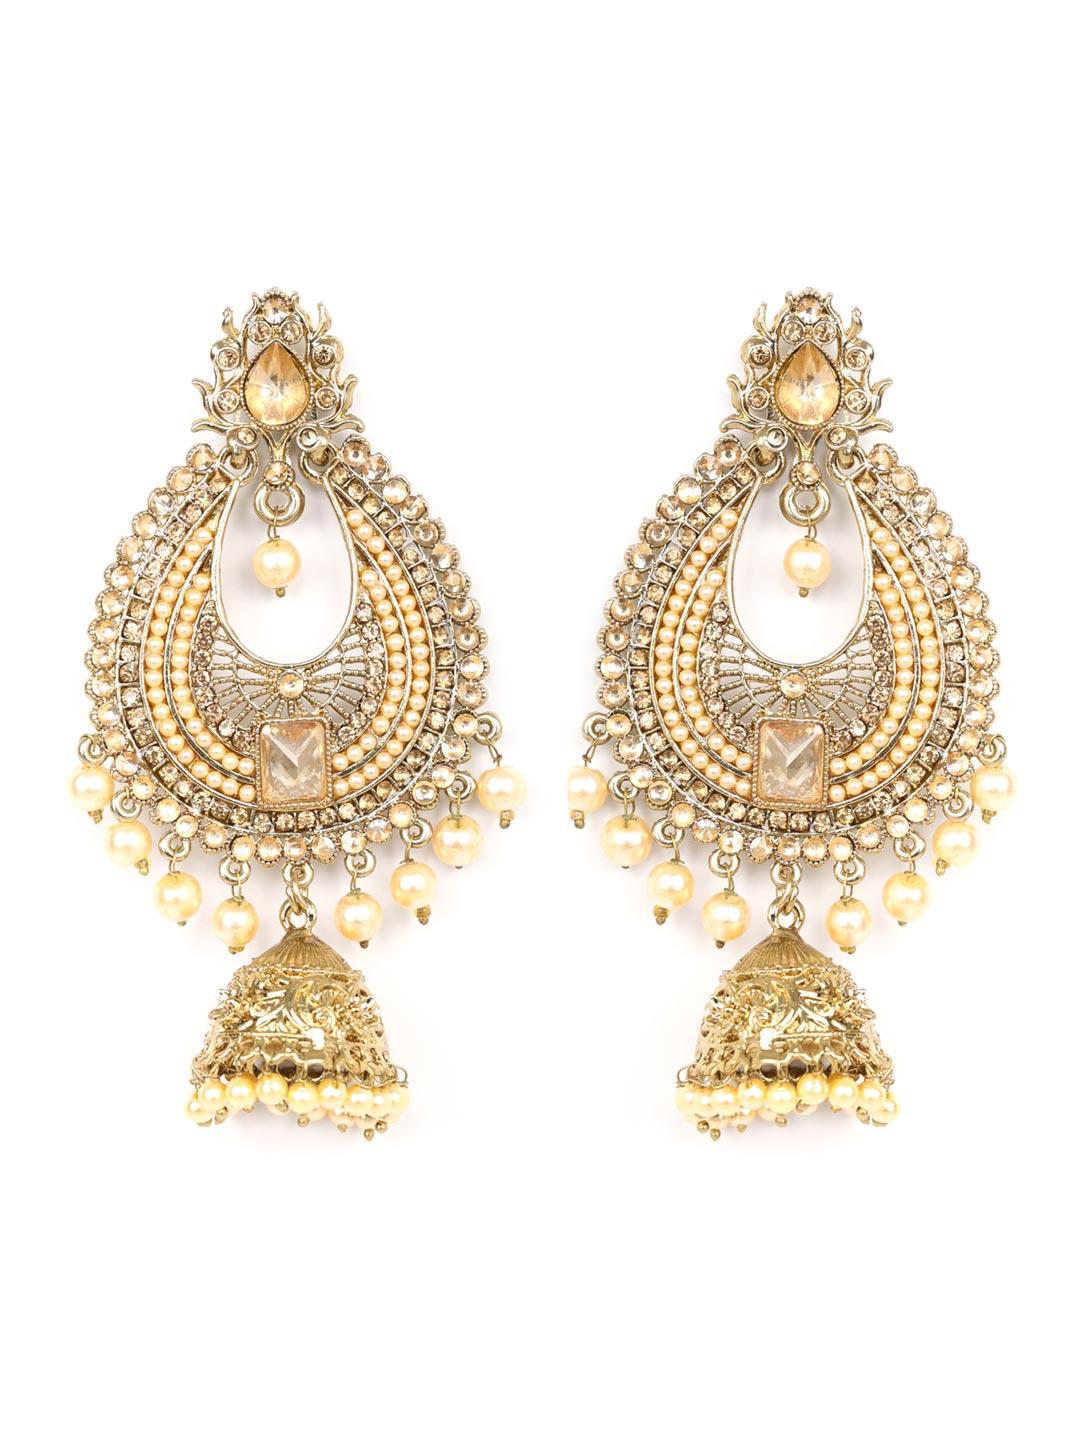 Off White Beads Pearls Artificial Stones Gold Plated Maang Tikka